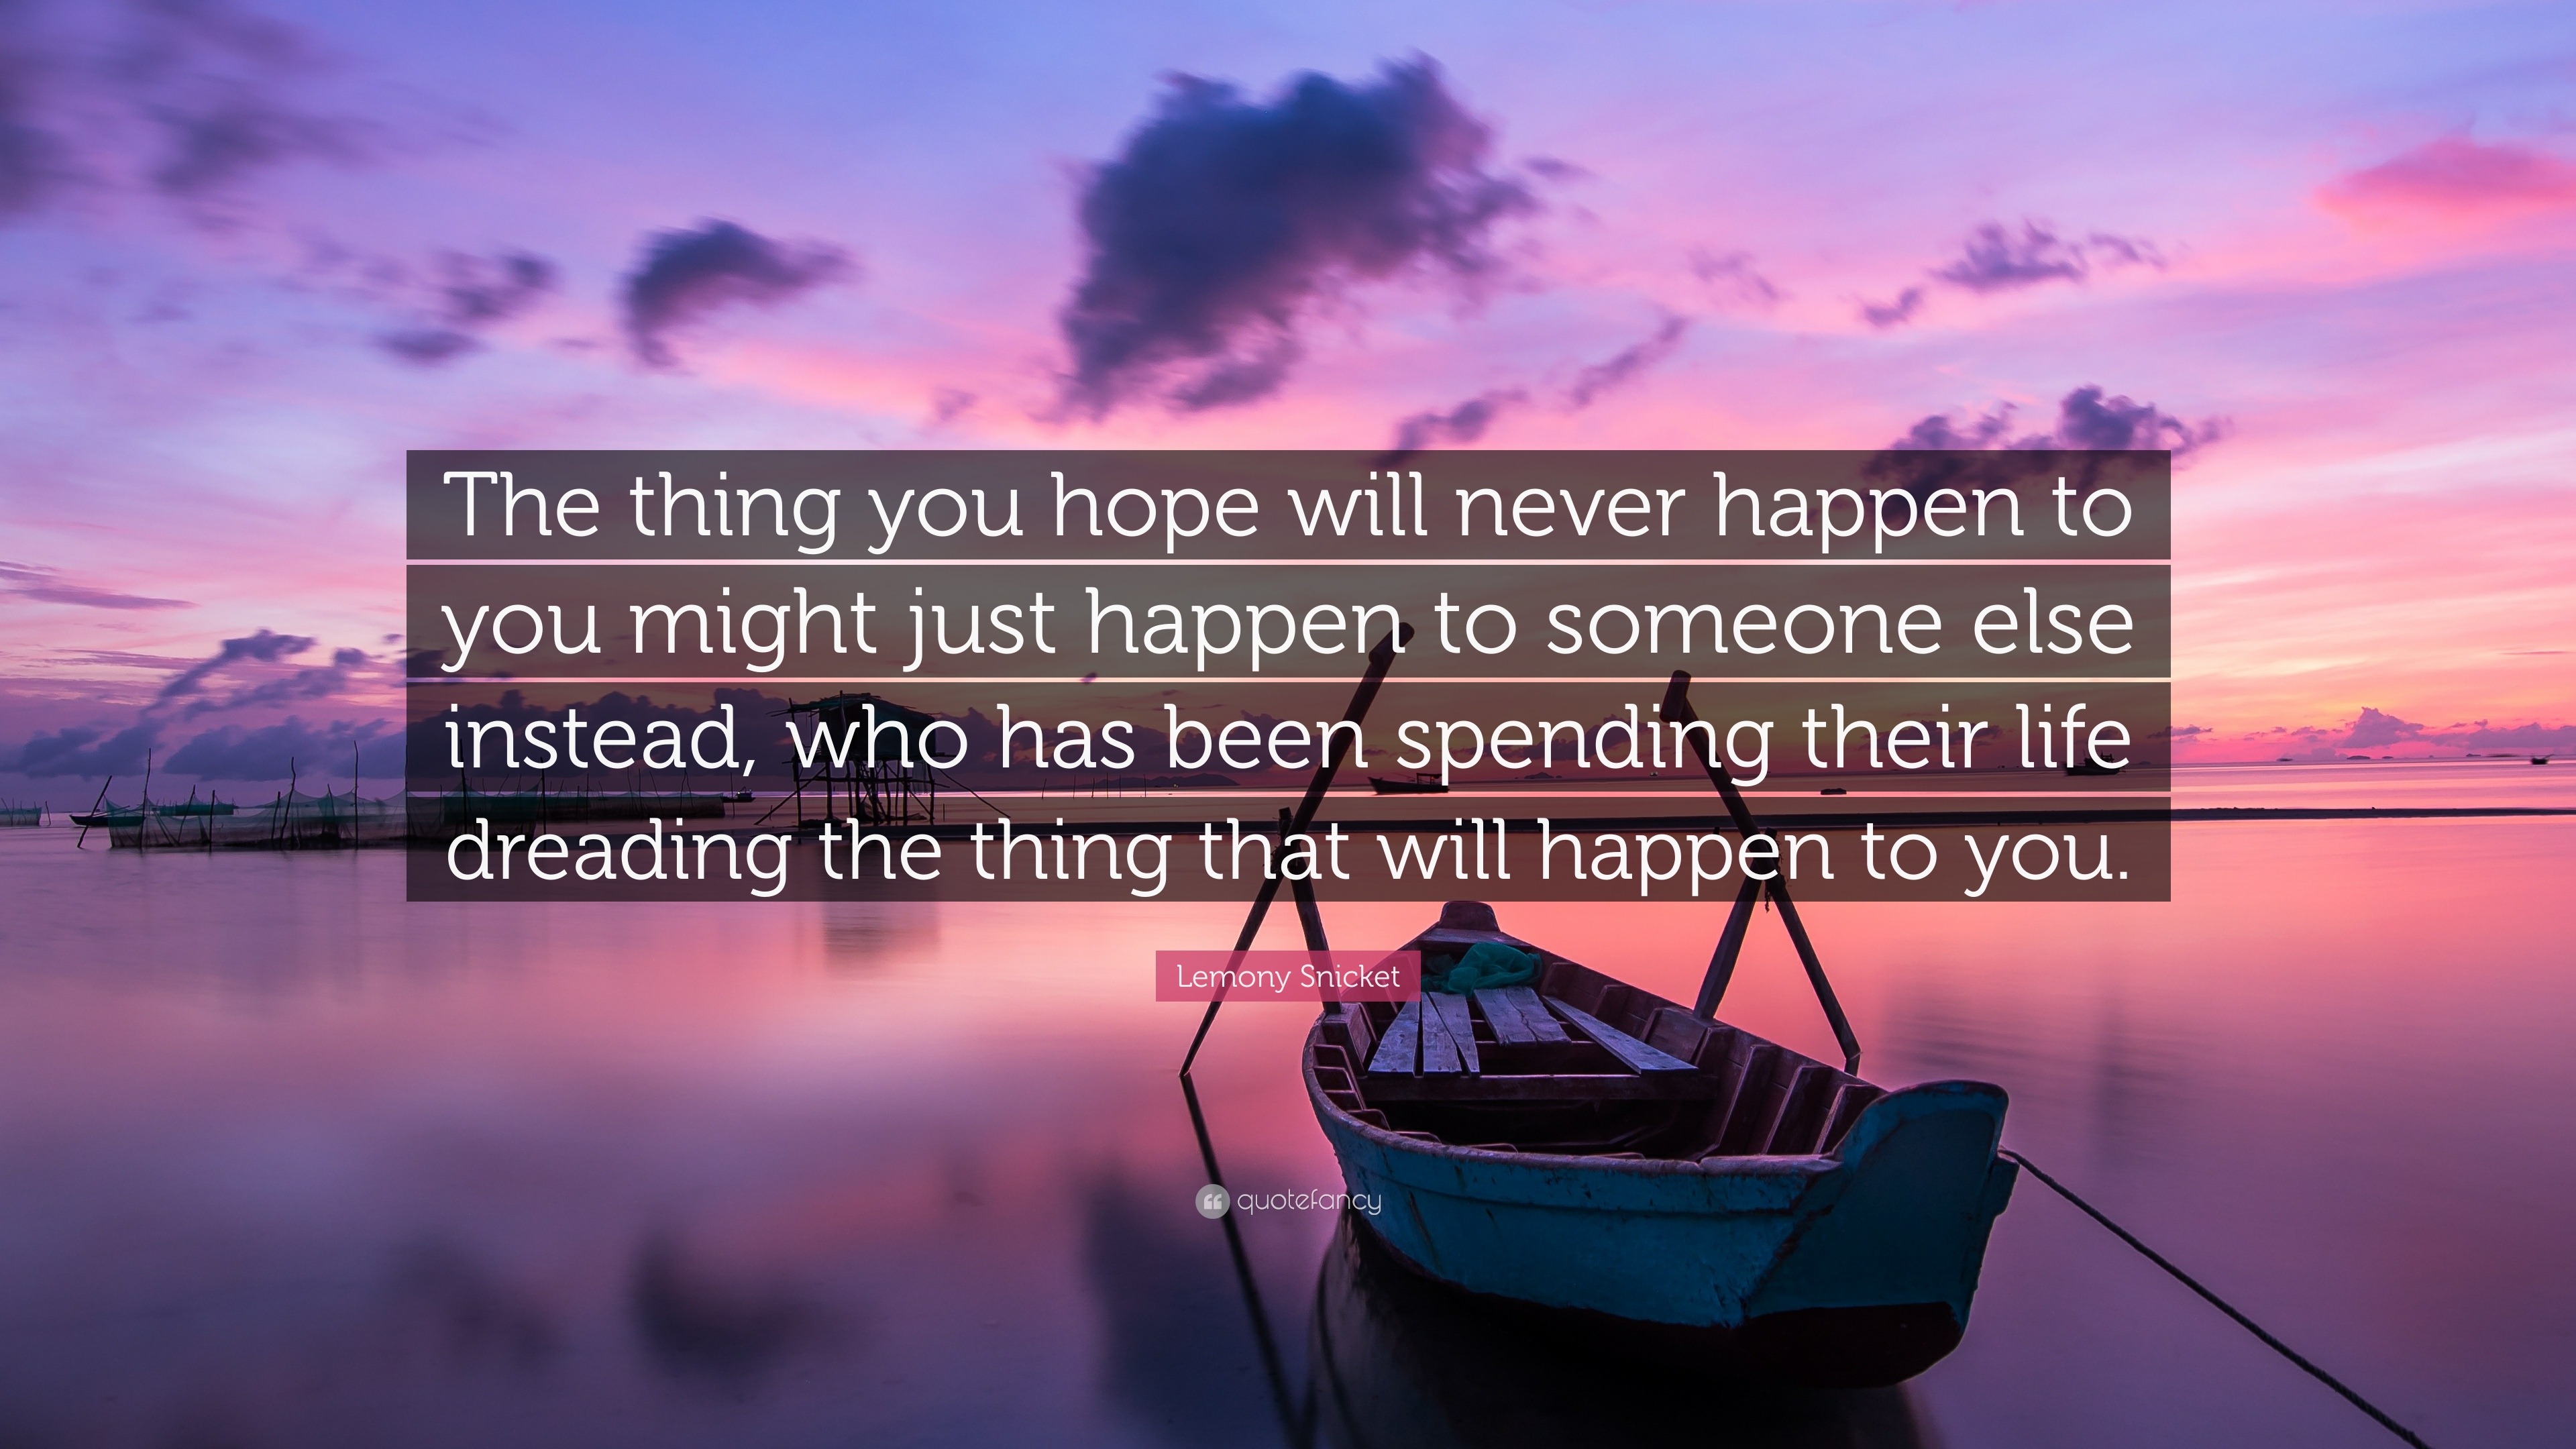 Lemony Snicket Quote: “The thing you hope will never happen to you ...